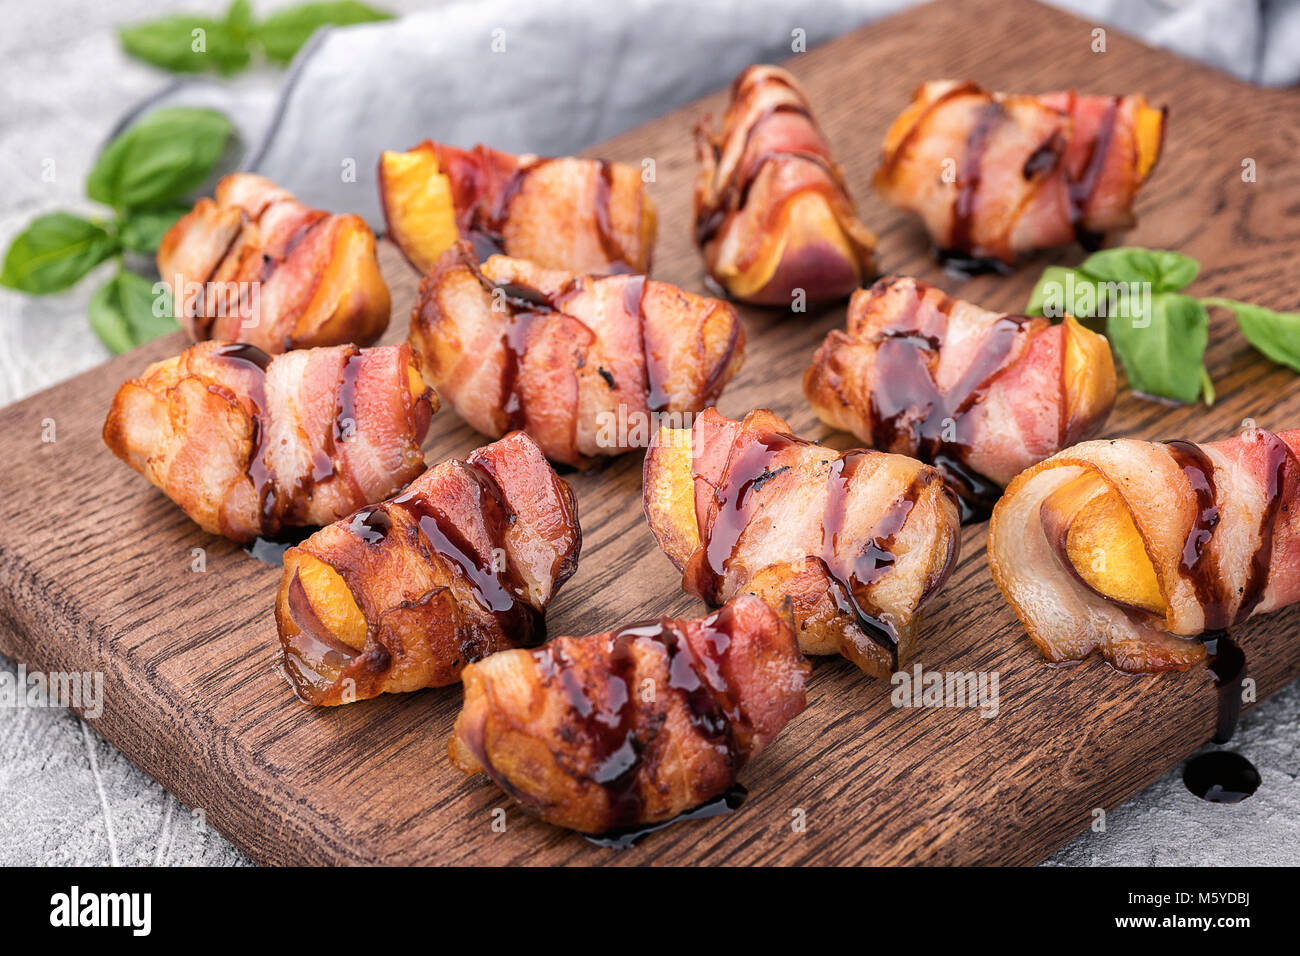 Grilled bacon wrapped peach with balsamic vinegar Stock Photo